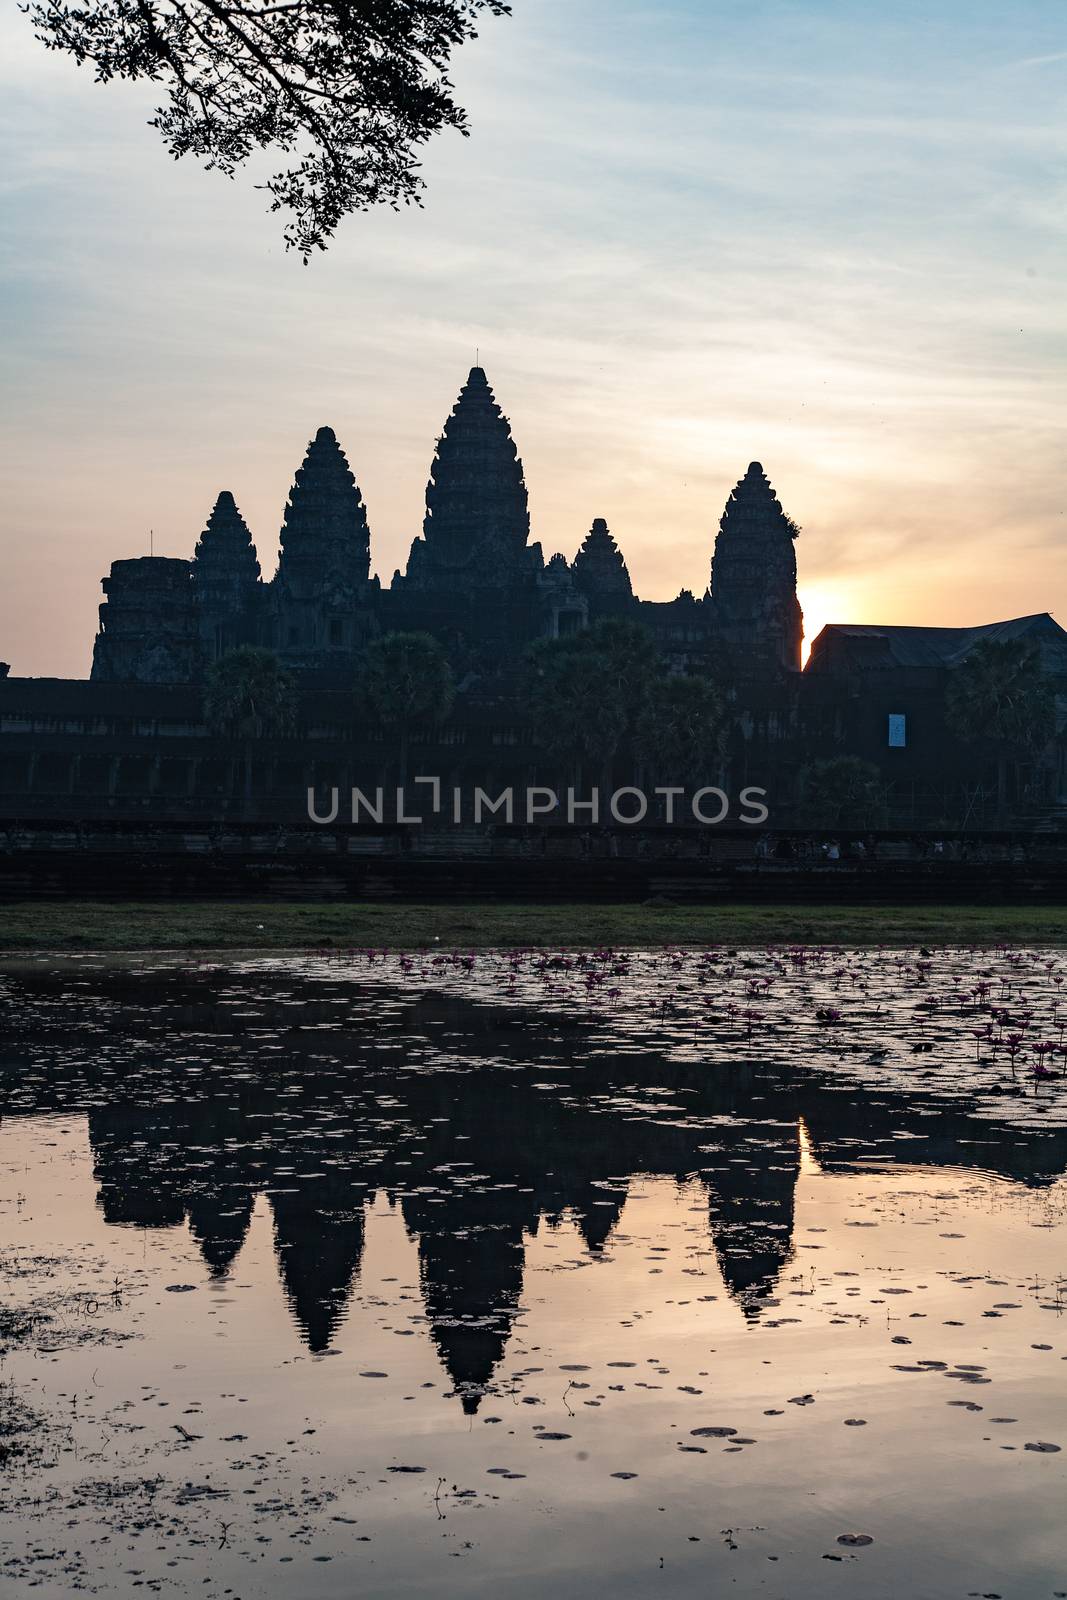 The temple complex of Angkor Watt, Cambodia, at dawn with reflection in lake by kgboxford